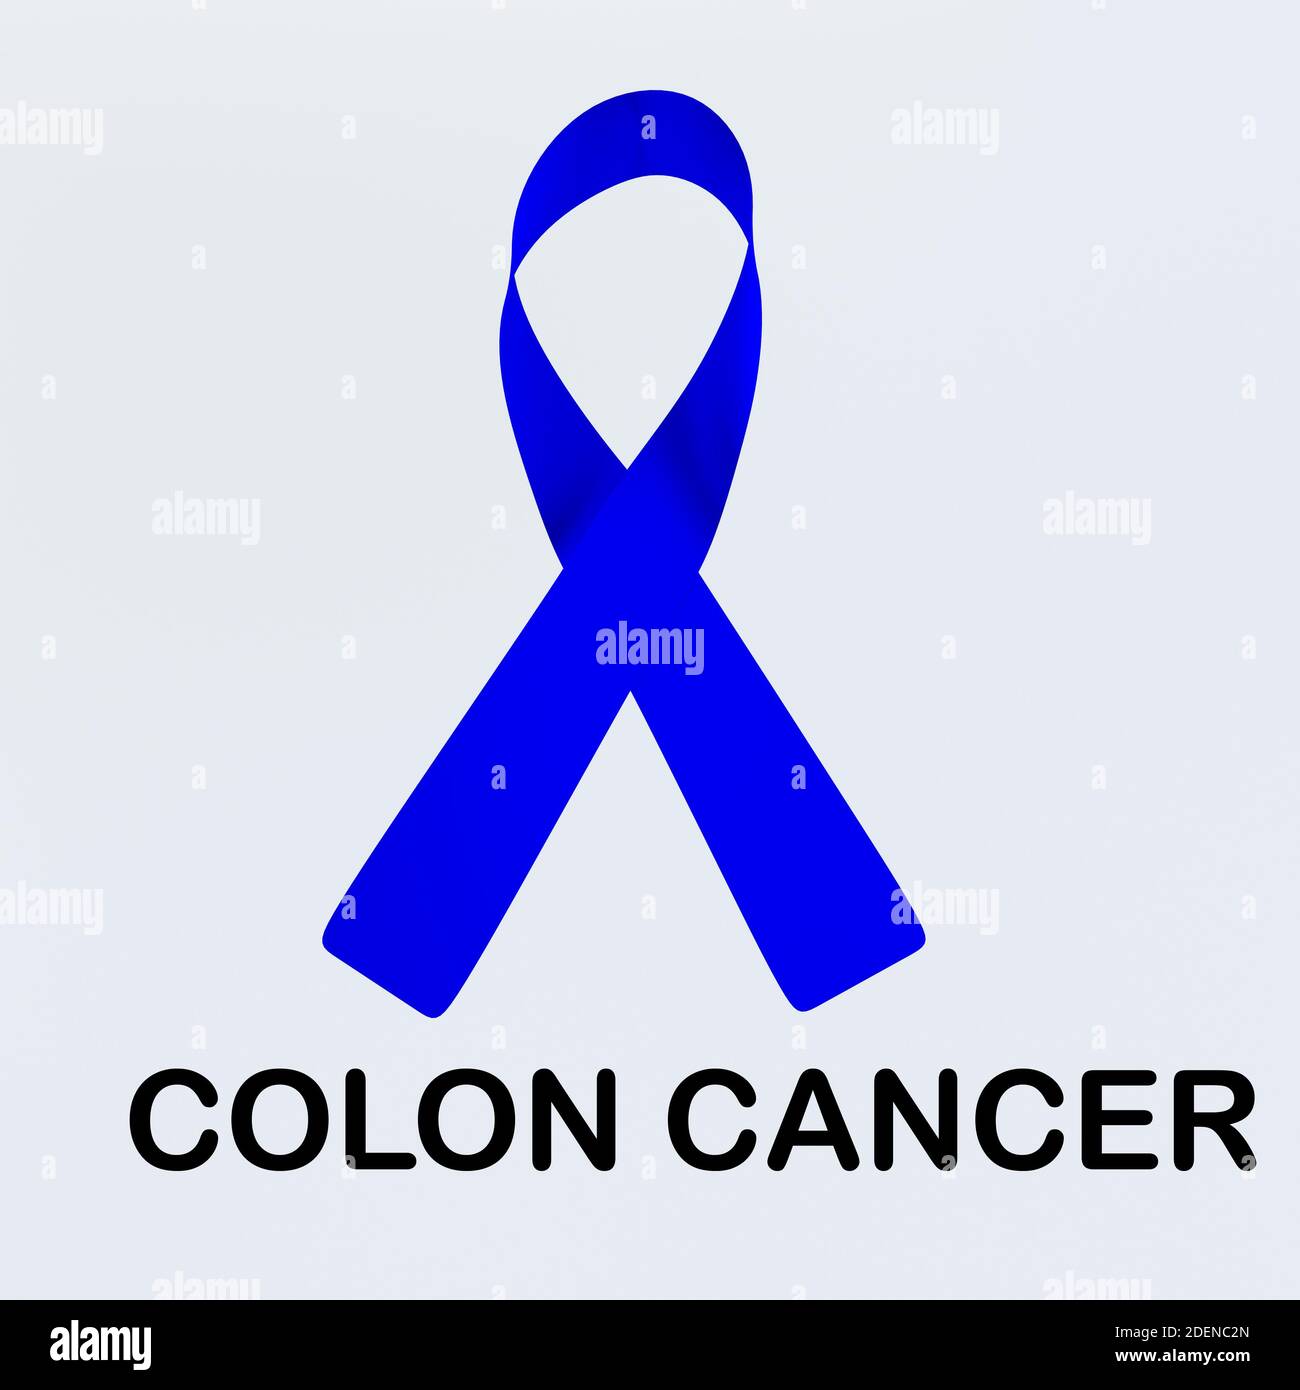 3D illustration COLON CANCER script below an awareness ribbon of colon cancer, isolated over pale blue background. Stock Photo